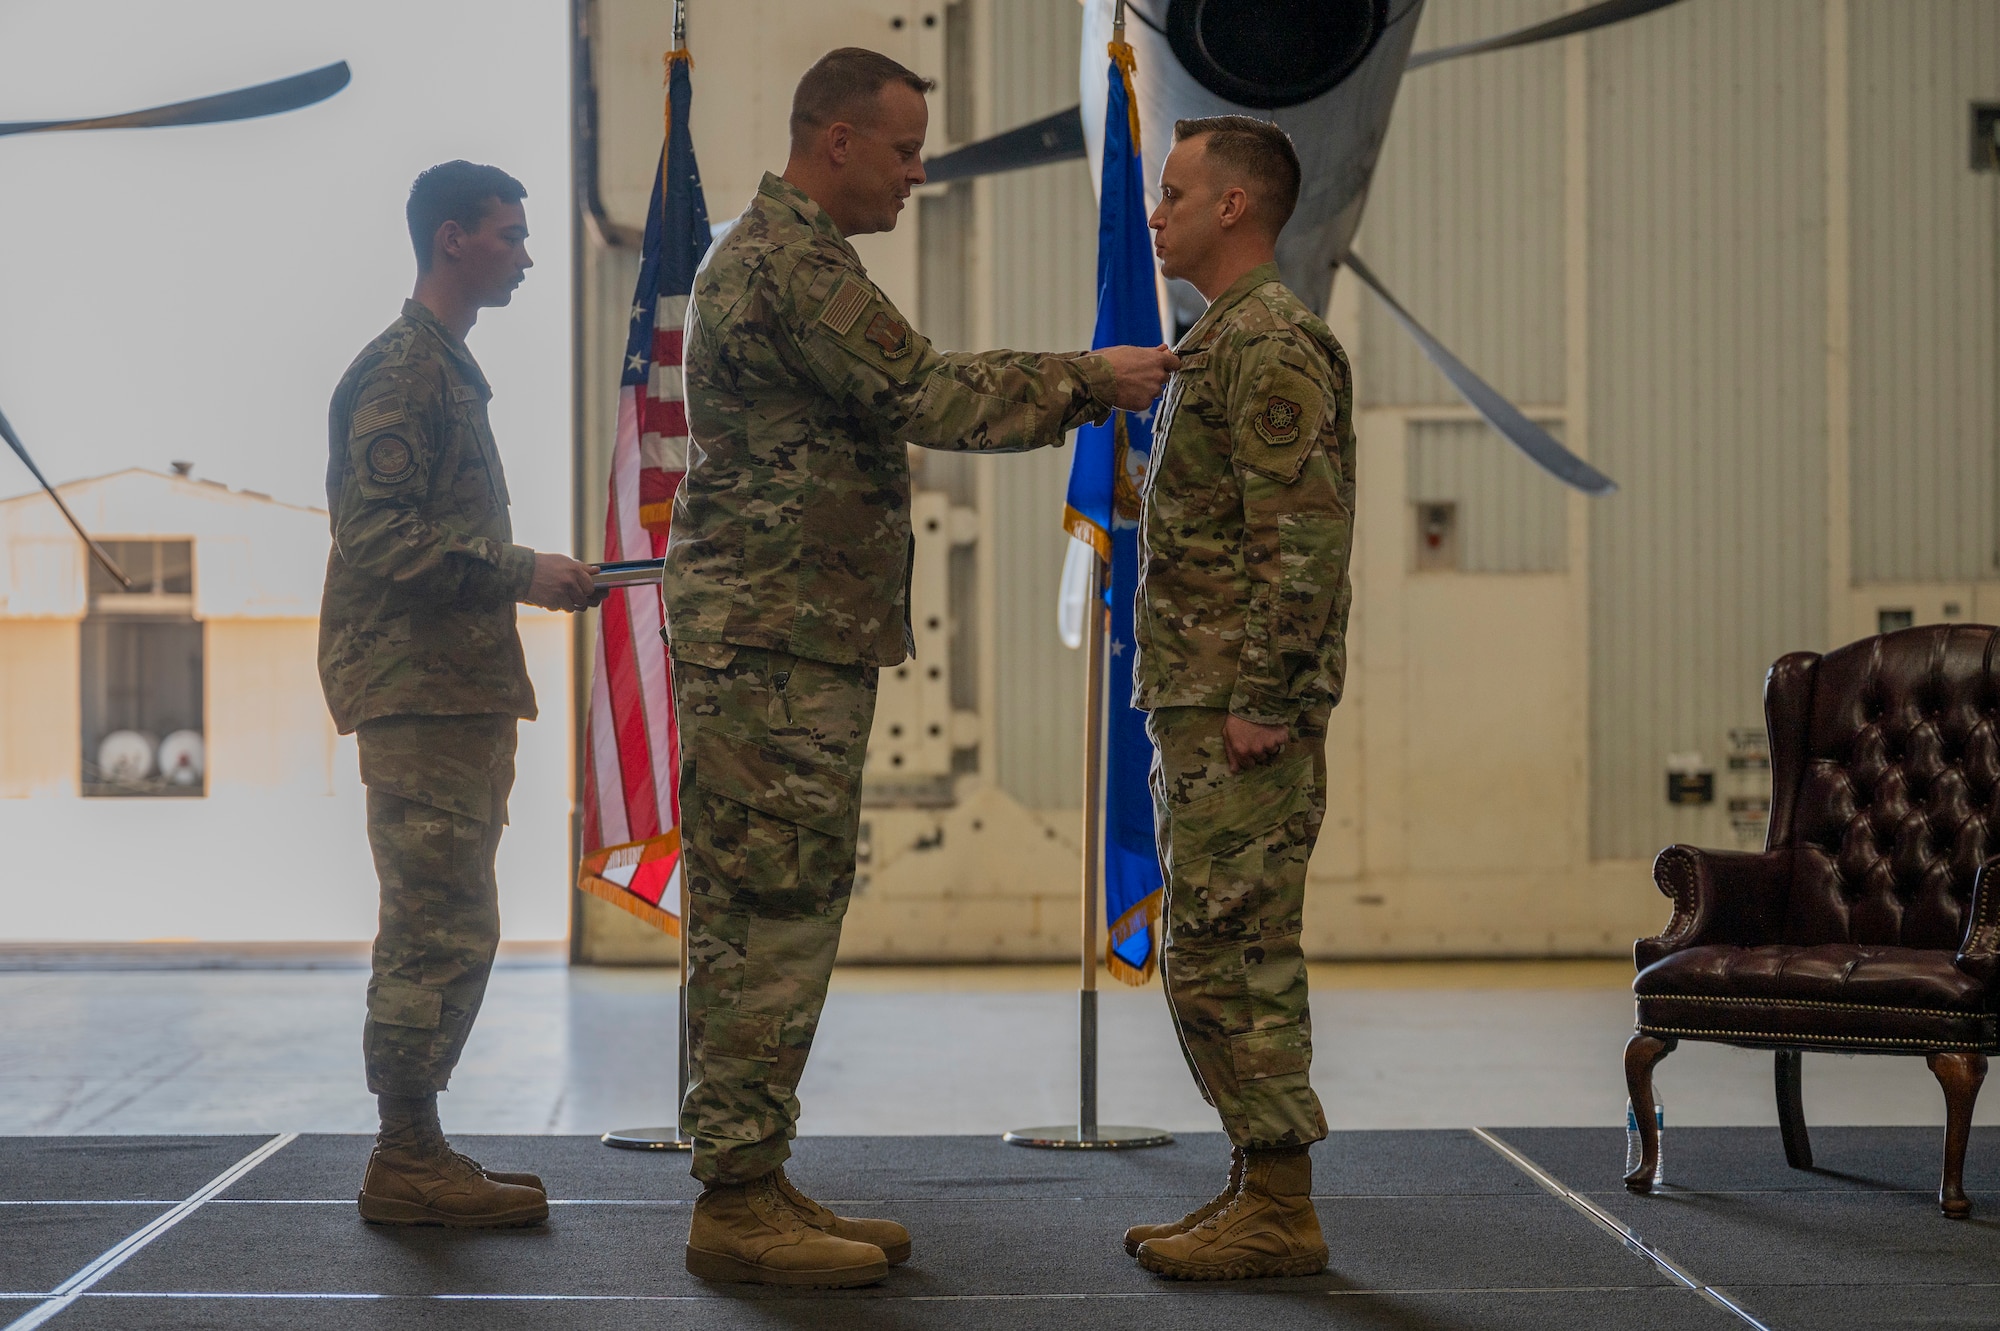 Col. Jeffrey Darden, 317th Maintenance Group commander, clips the Meritorious Service Medal onto Maj. Andrew Brock, outgoing commander of the 317th Maintenance Squadron at Dyess Air Force Base, Texas, 17 Jun 2022. During his command, Brock helped establish the Wing’s first Airman Tier 1 Training Program, which provides joint maneuver and defend-the-base warfighting skills for operating in contested environments. (U.S. Air Force photo by Senior Airman Reilly McGuire)